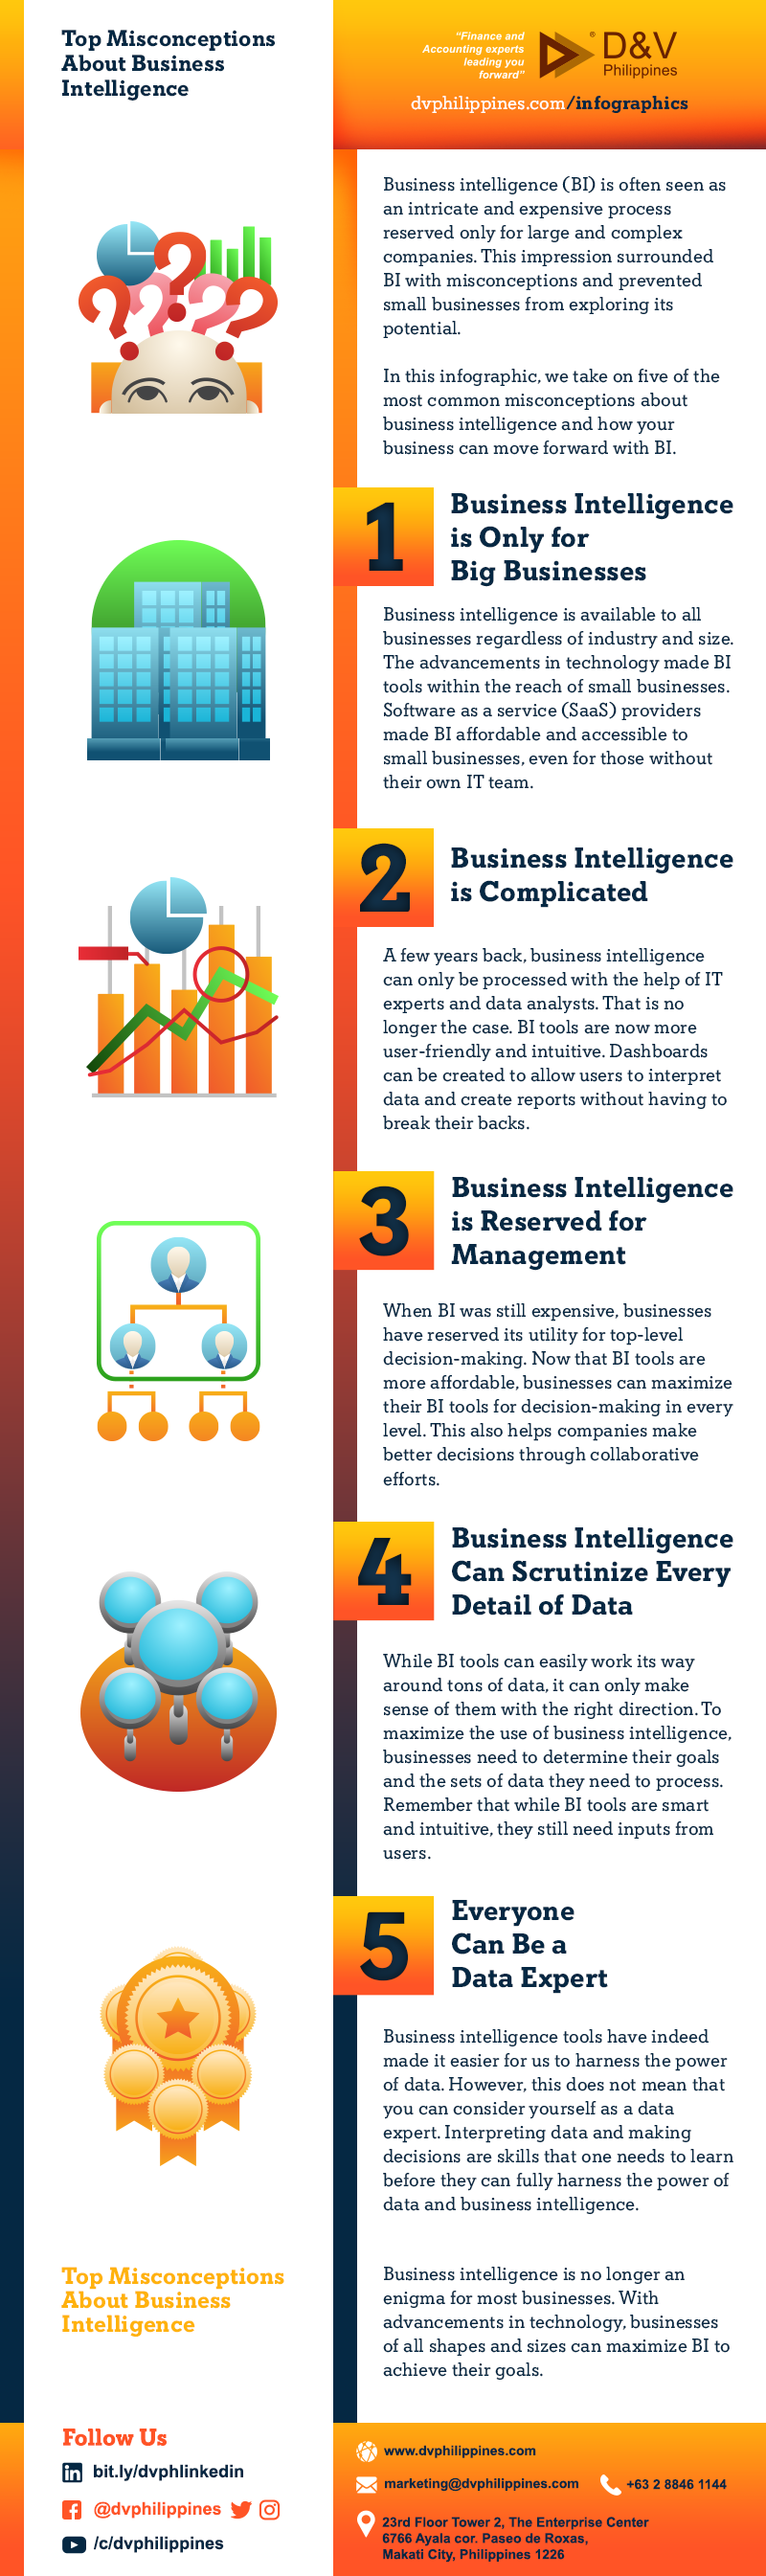 DV_Infog_081922_Top-Misconceptions-About-Business-Intelligence_Content